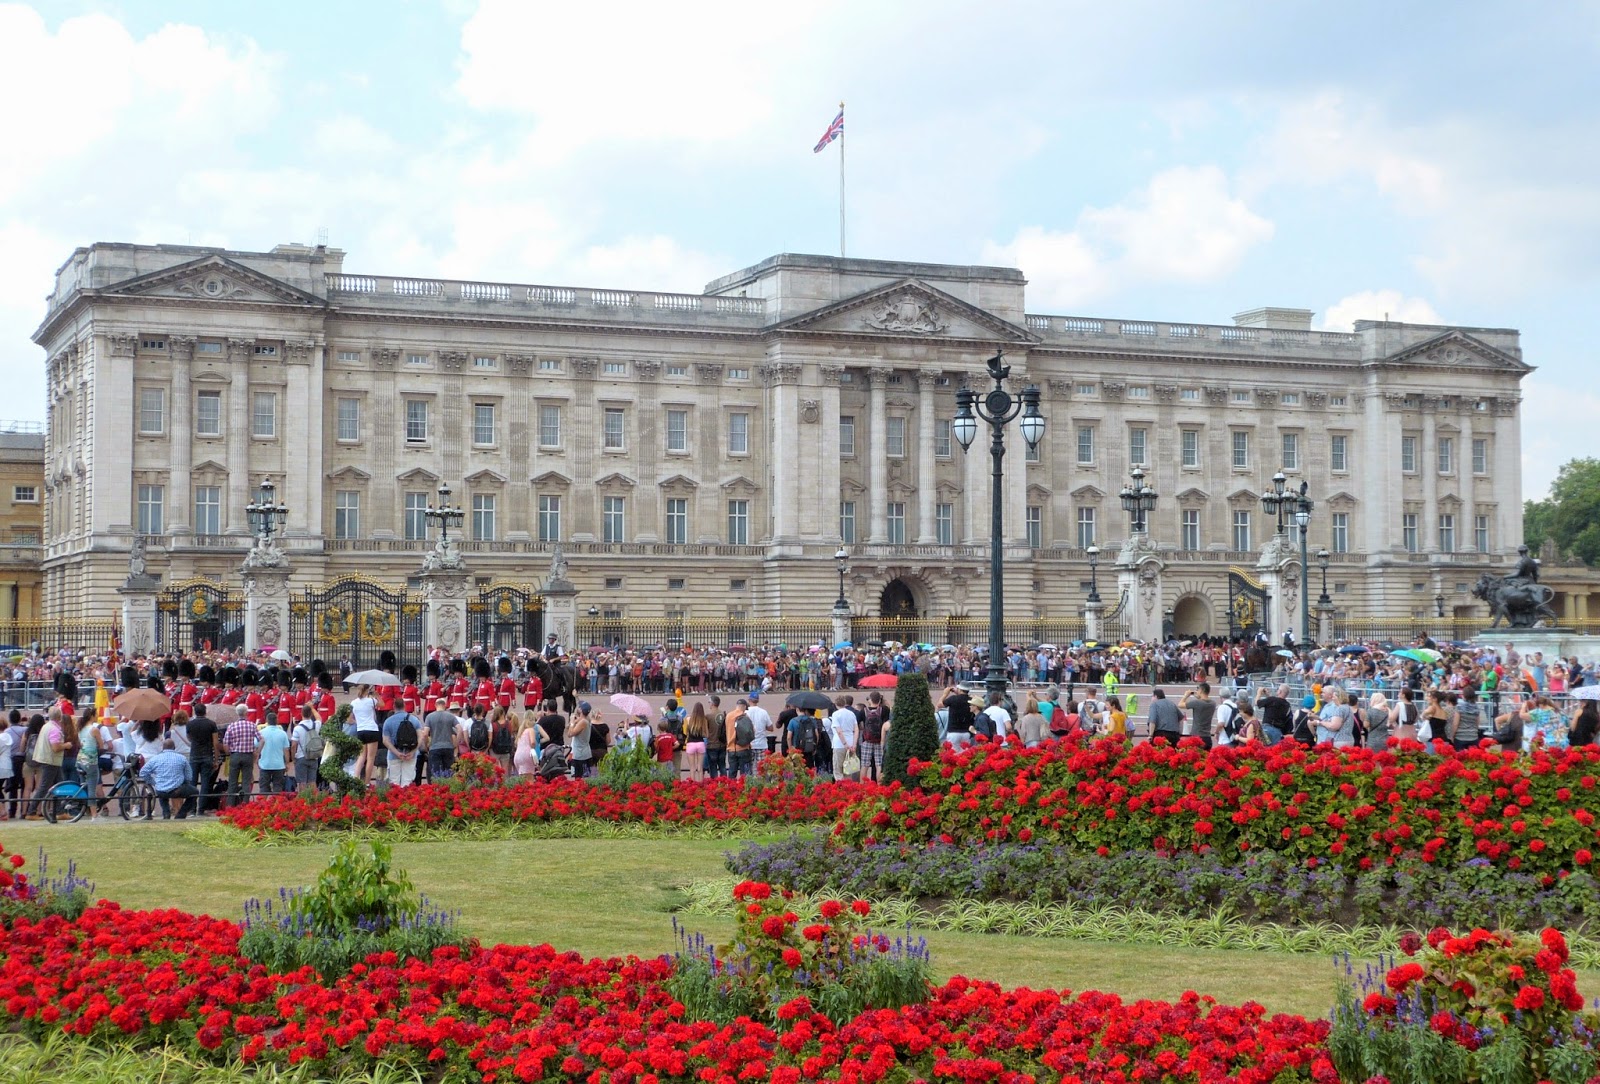 Buckingham Palace 25 July 2014 at changing of the guard